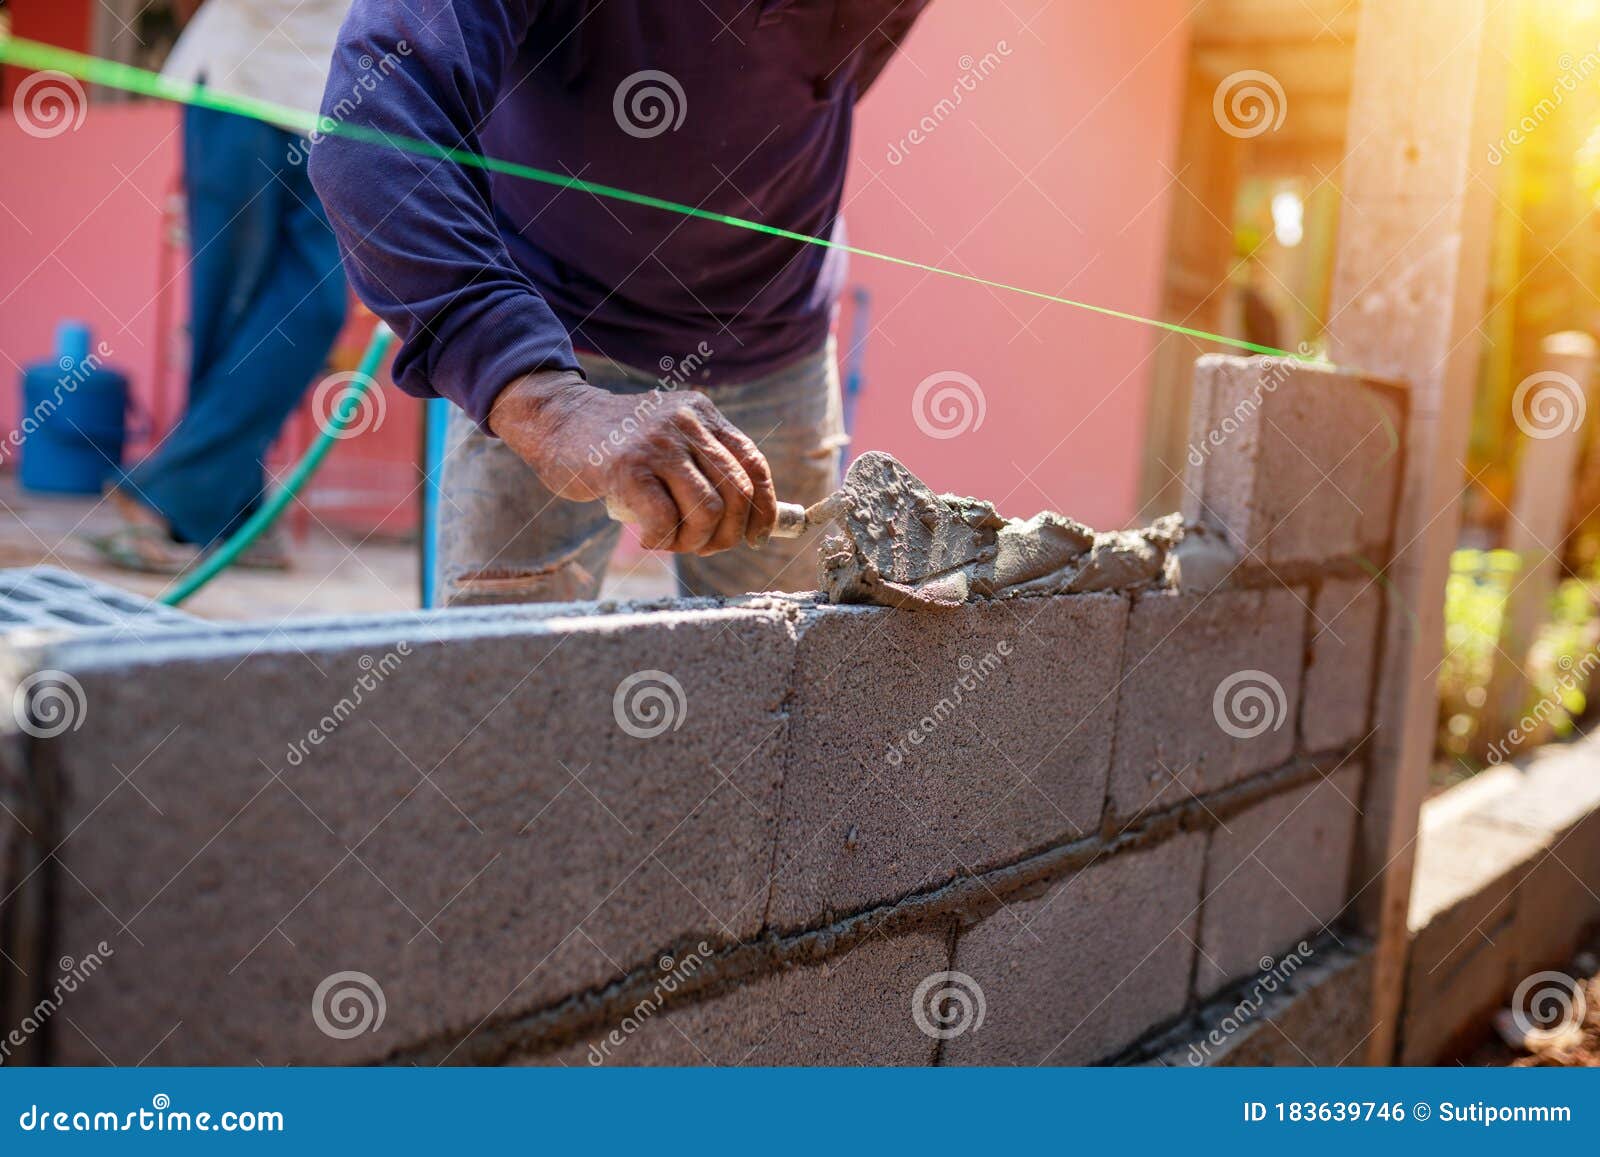 techniques for cement masonry for the construction of building wall